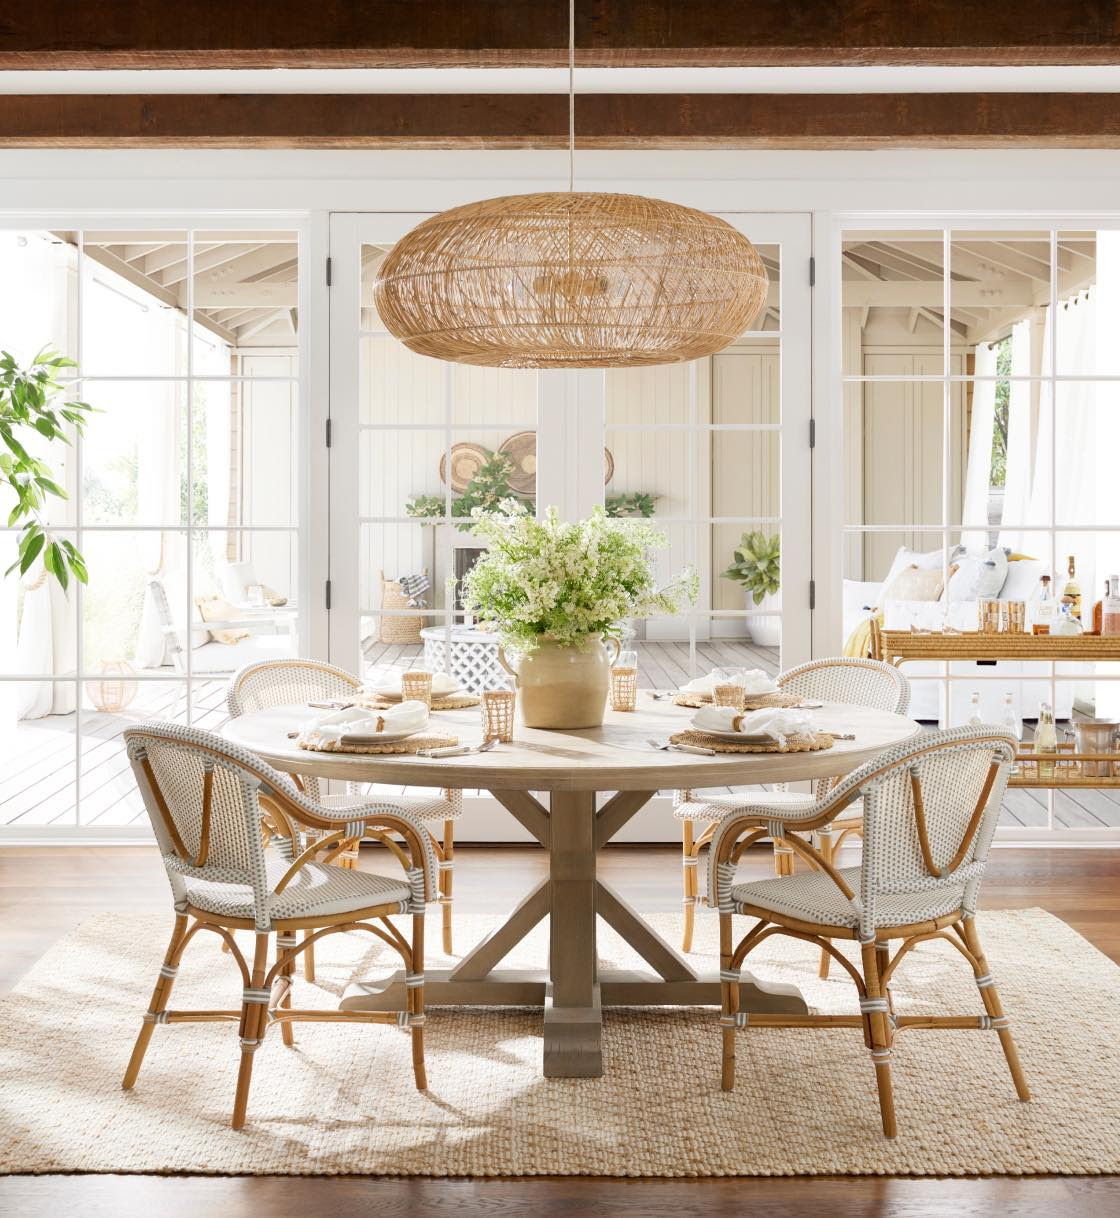 Dining room - Serena & Lily - wood beams - round dining table - dining room decor